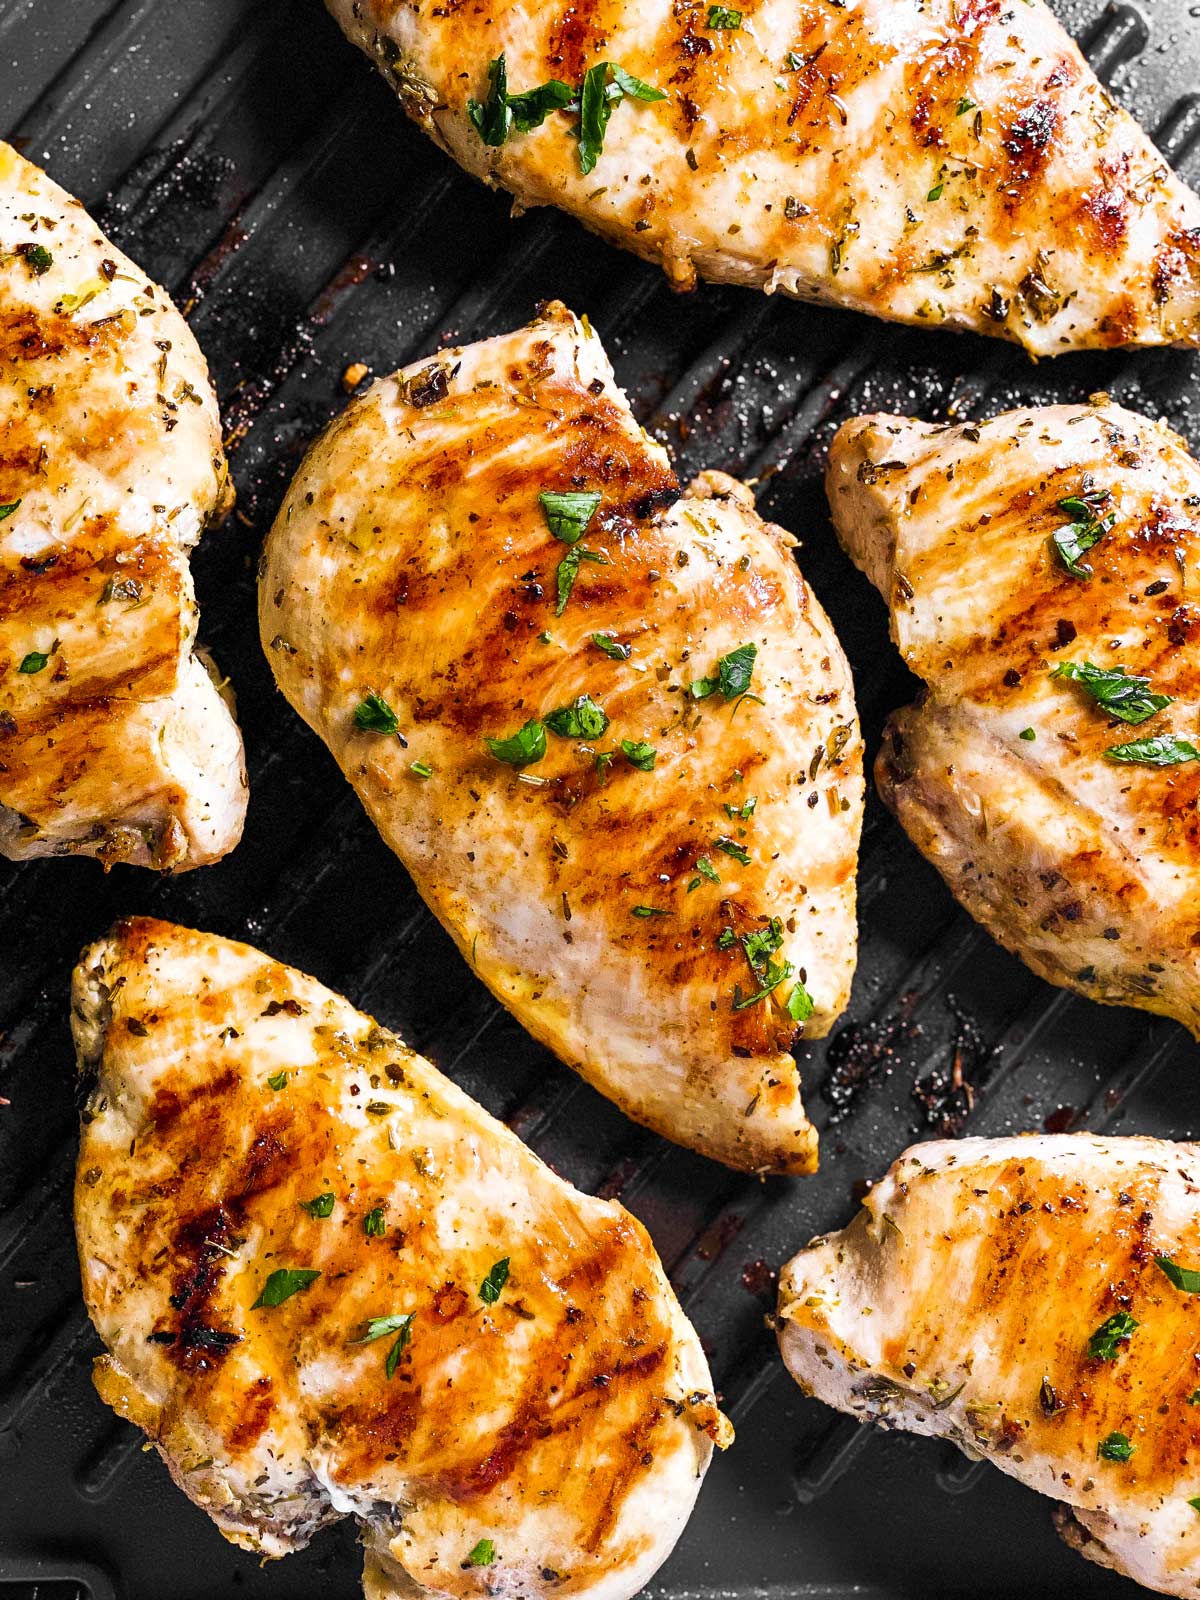 Grilled Chicken Breasts - Cooking Classy